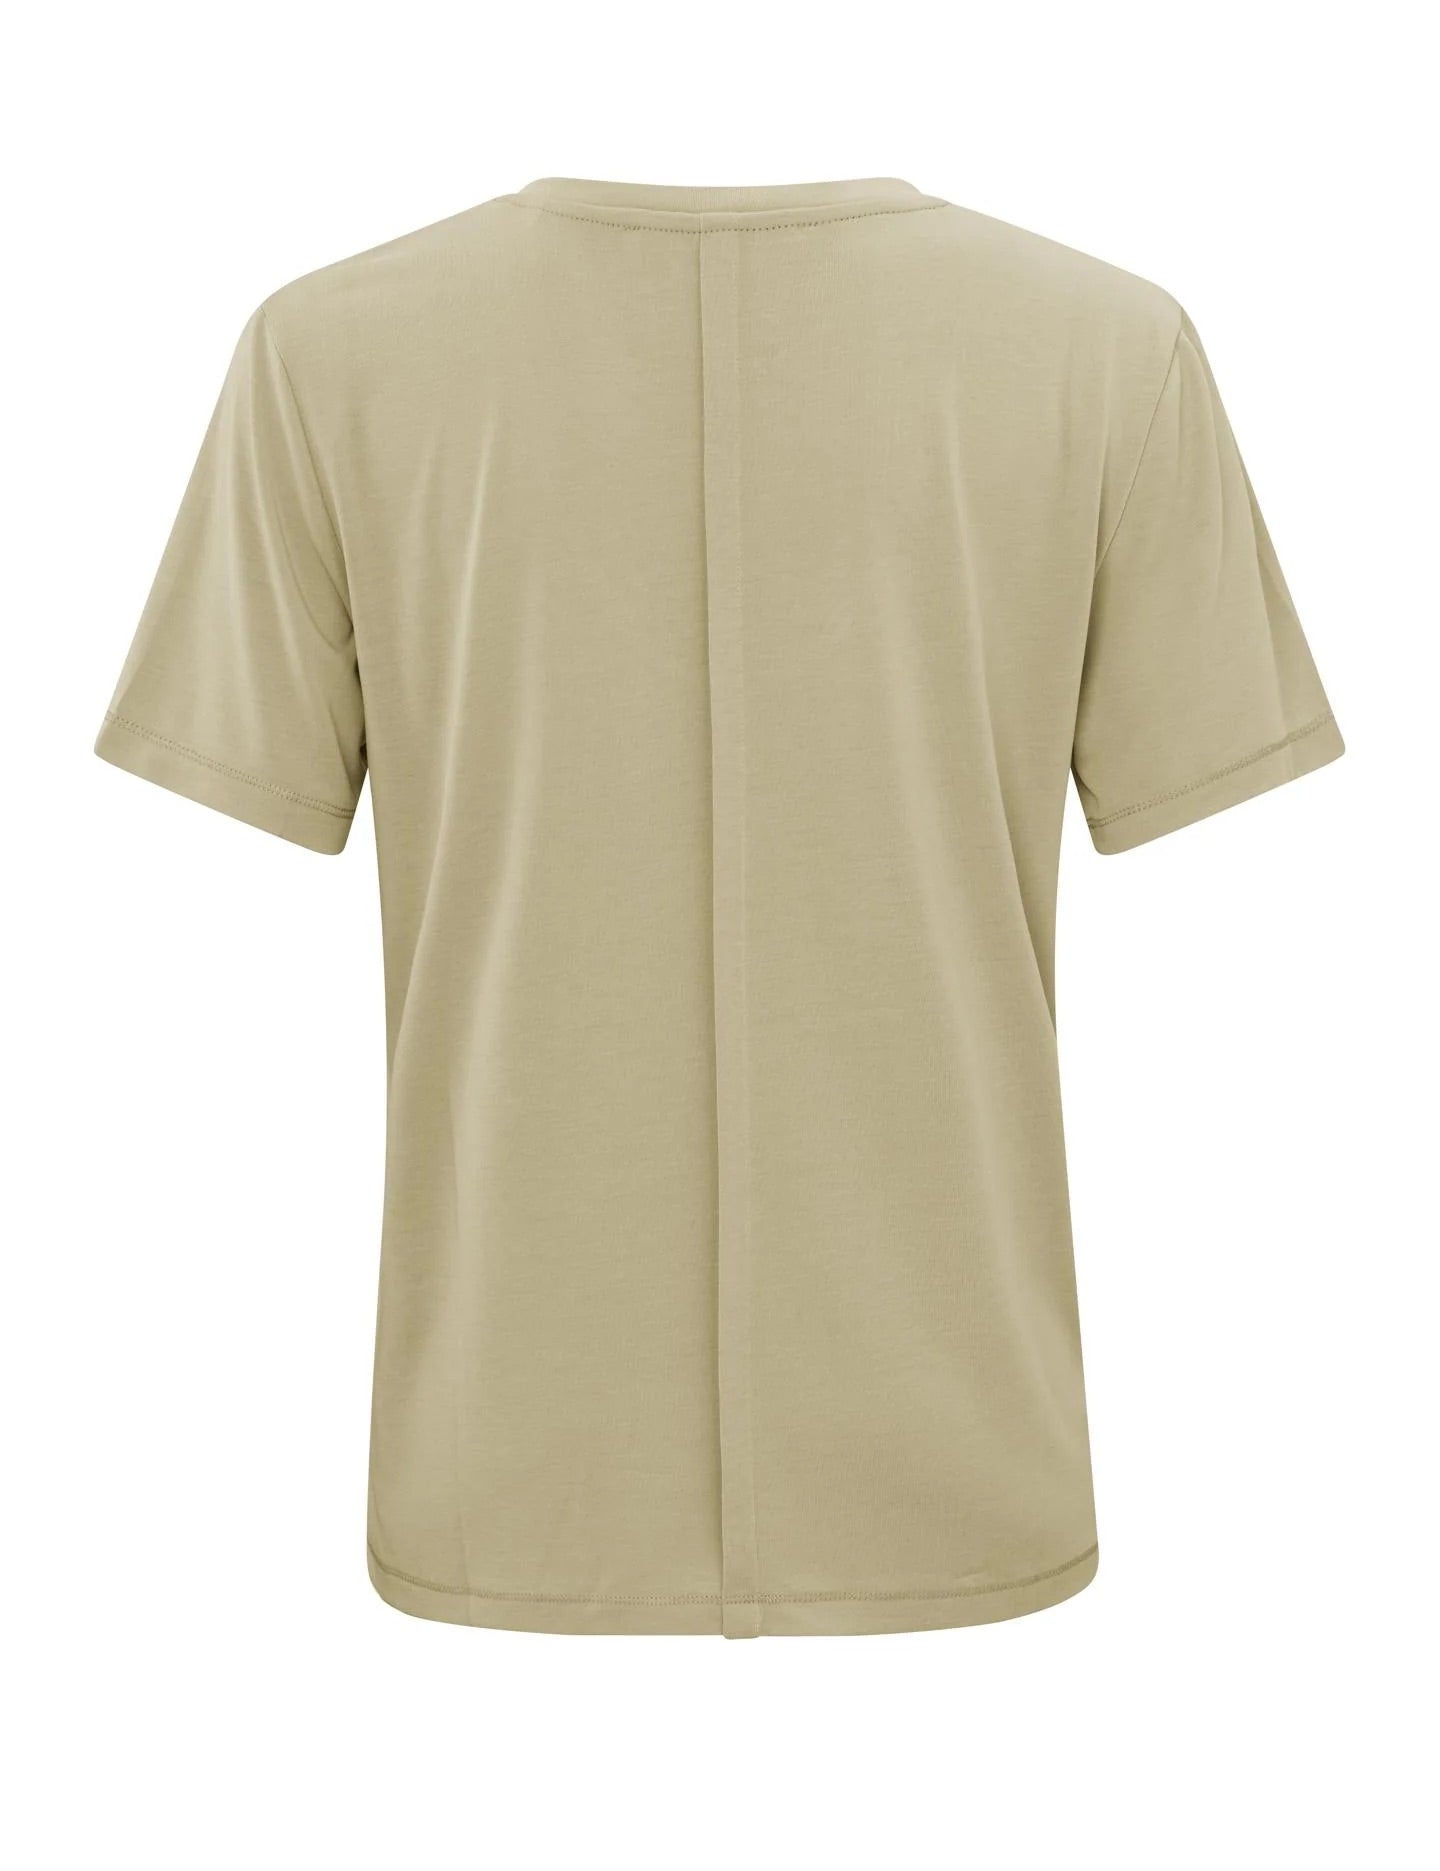 t-shirt-with-rounded-v-neck-and-short-sleeves-in-regular-fit-eucalyptus-green_2880x_jpg.jpg